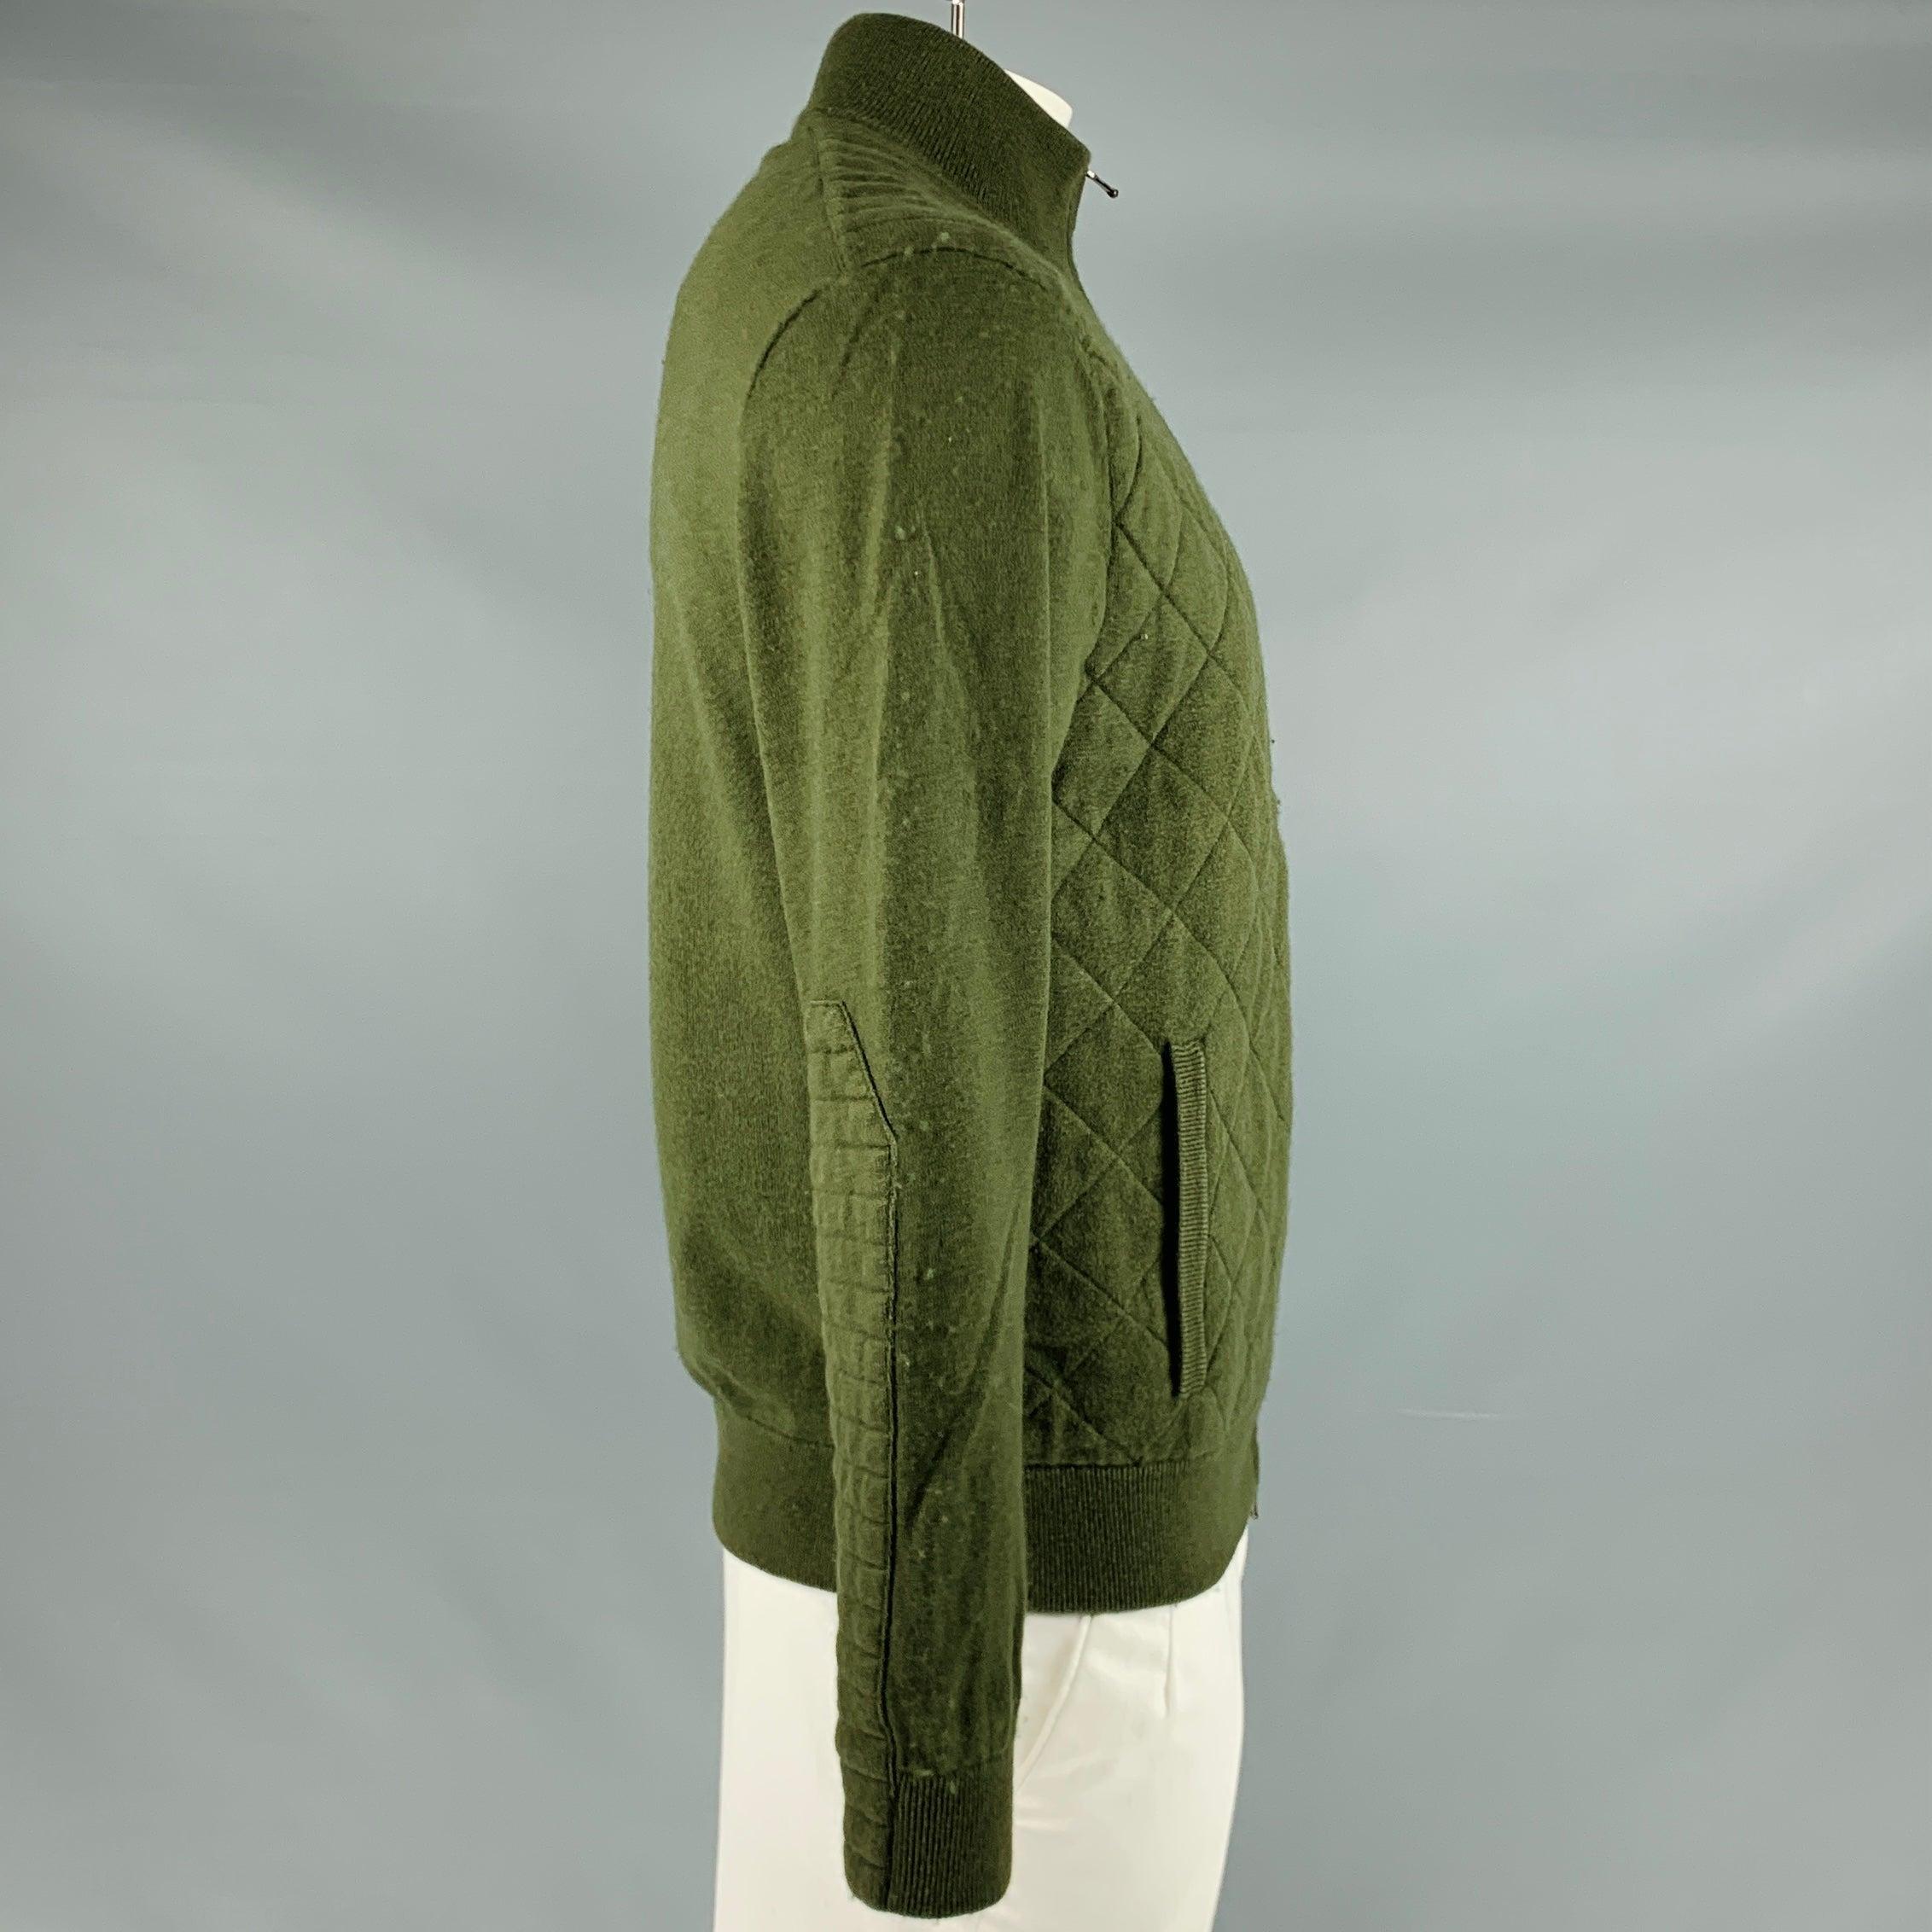 RRL by RALPH LAUREN jacket
in an olive grey cotton wool blend knit featuring a quilted style, two pockets, and zip up closure.Good Pre-Owned Condition.
Moderate pilling throughout. 

Marked:   L 

Measurements: 
 
Shoulder: 19.5 inches Chest: 42